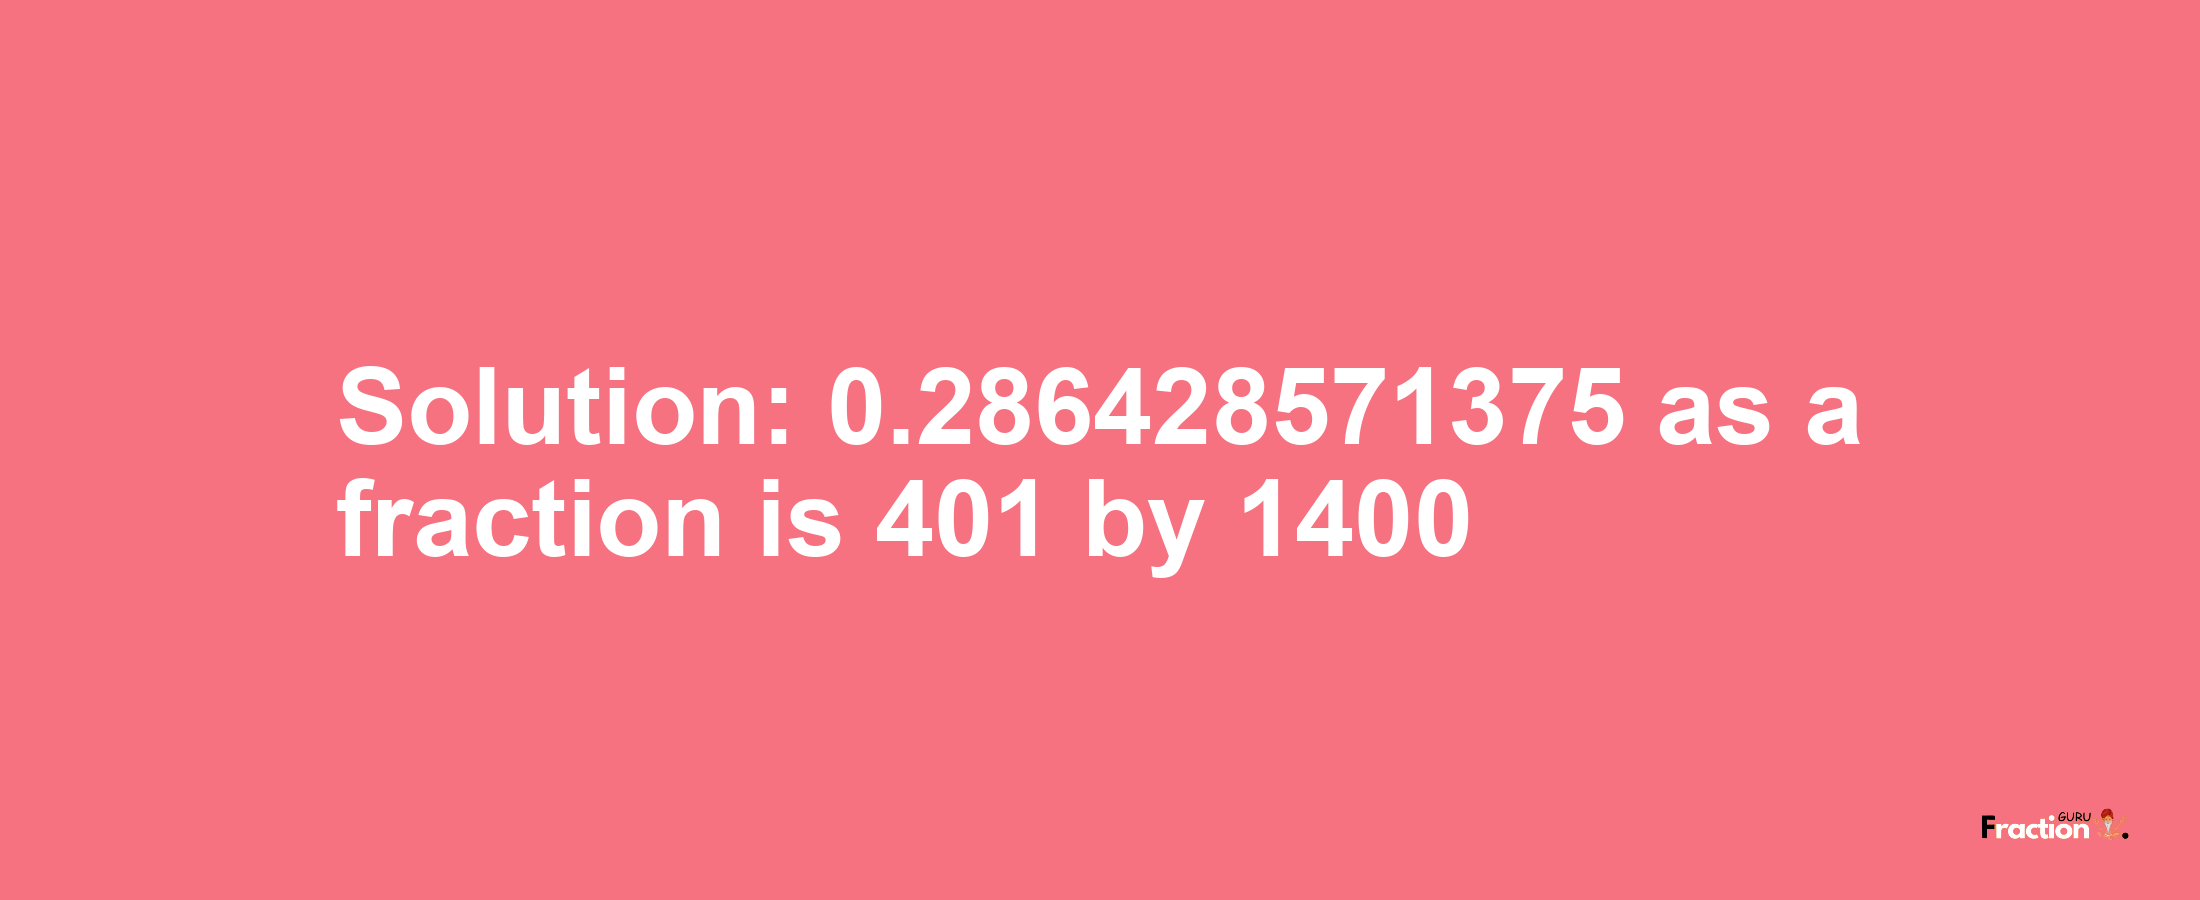 Solution:0.286428571375 as a fraction is 401/1400